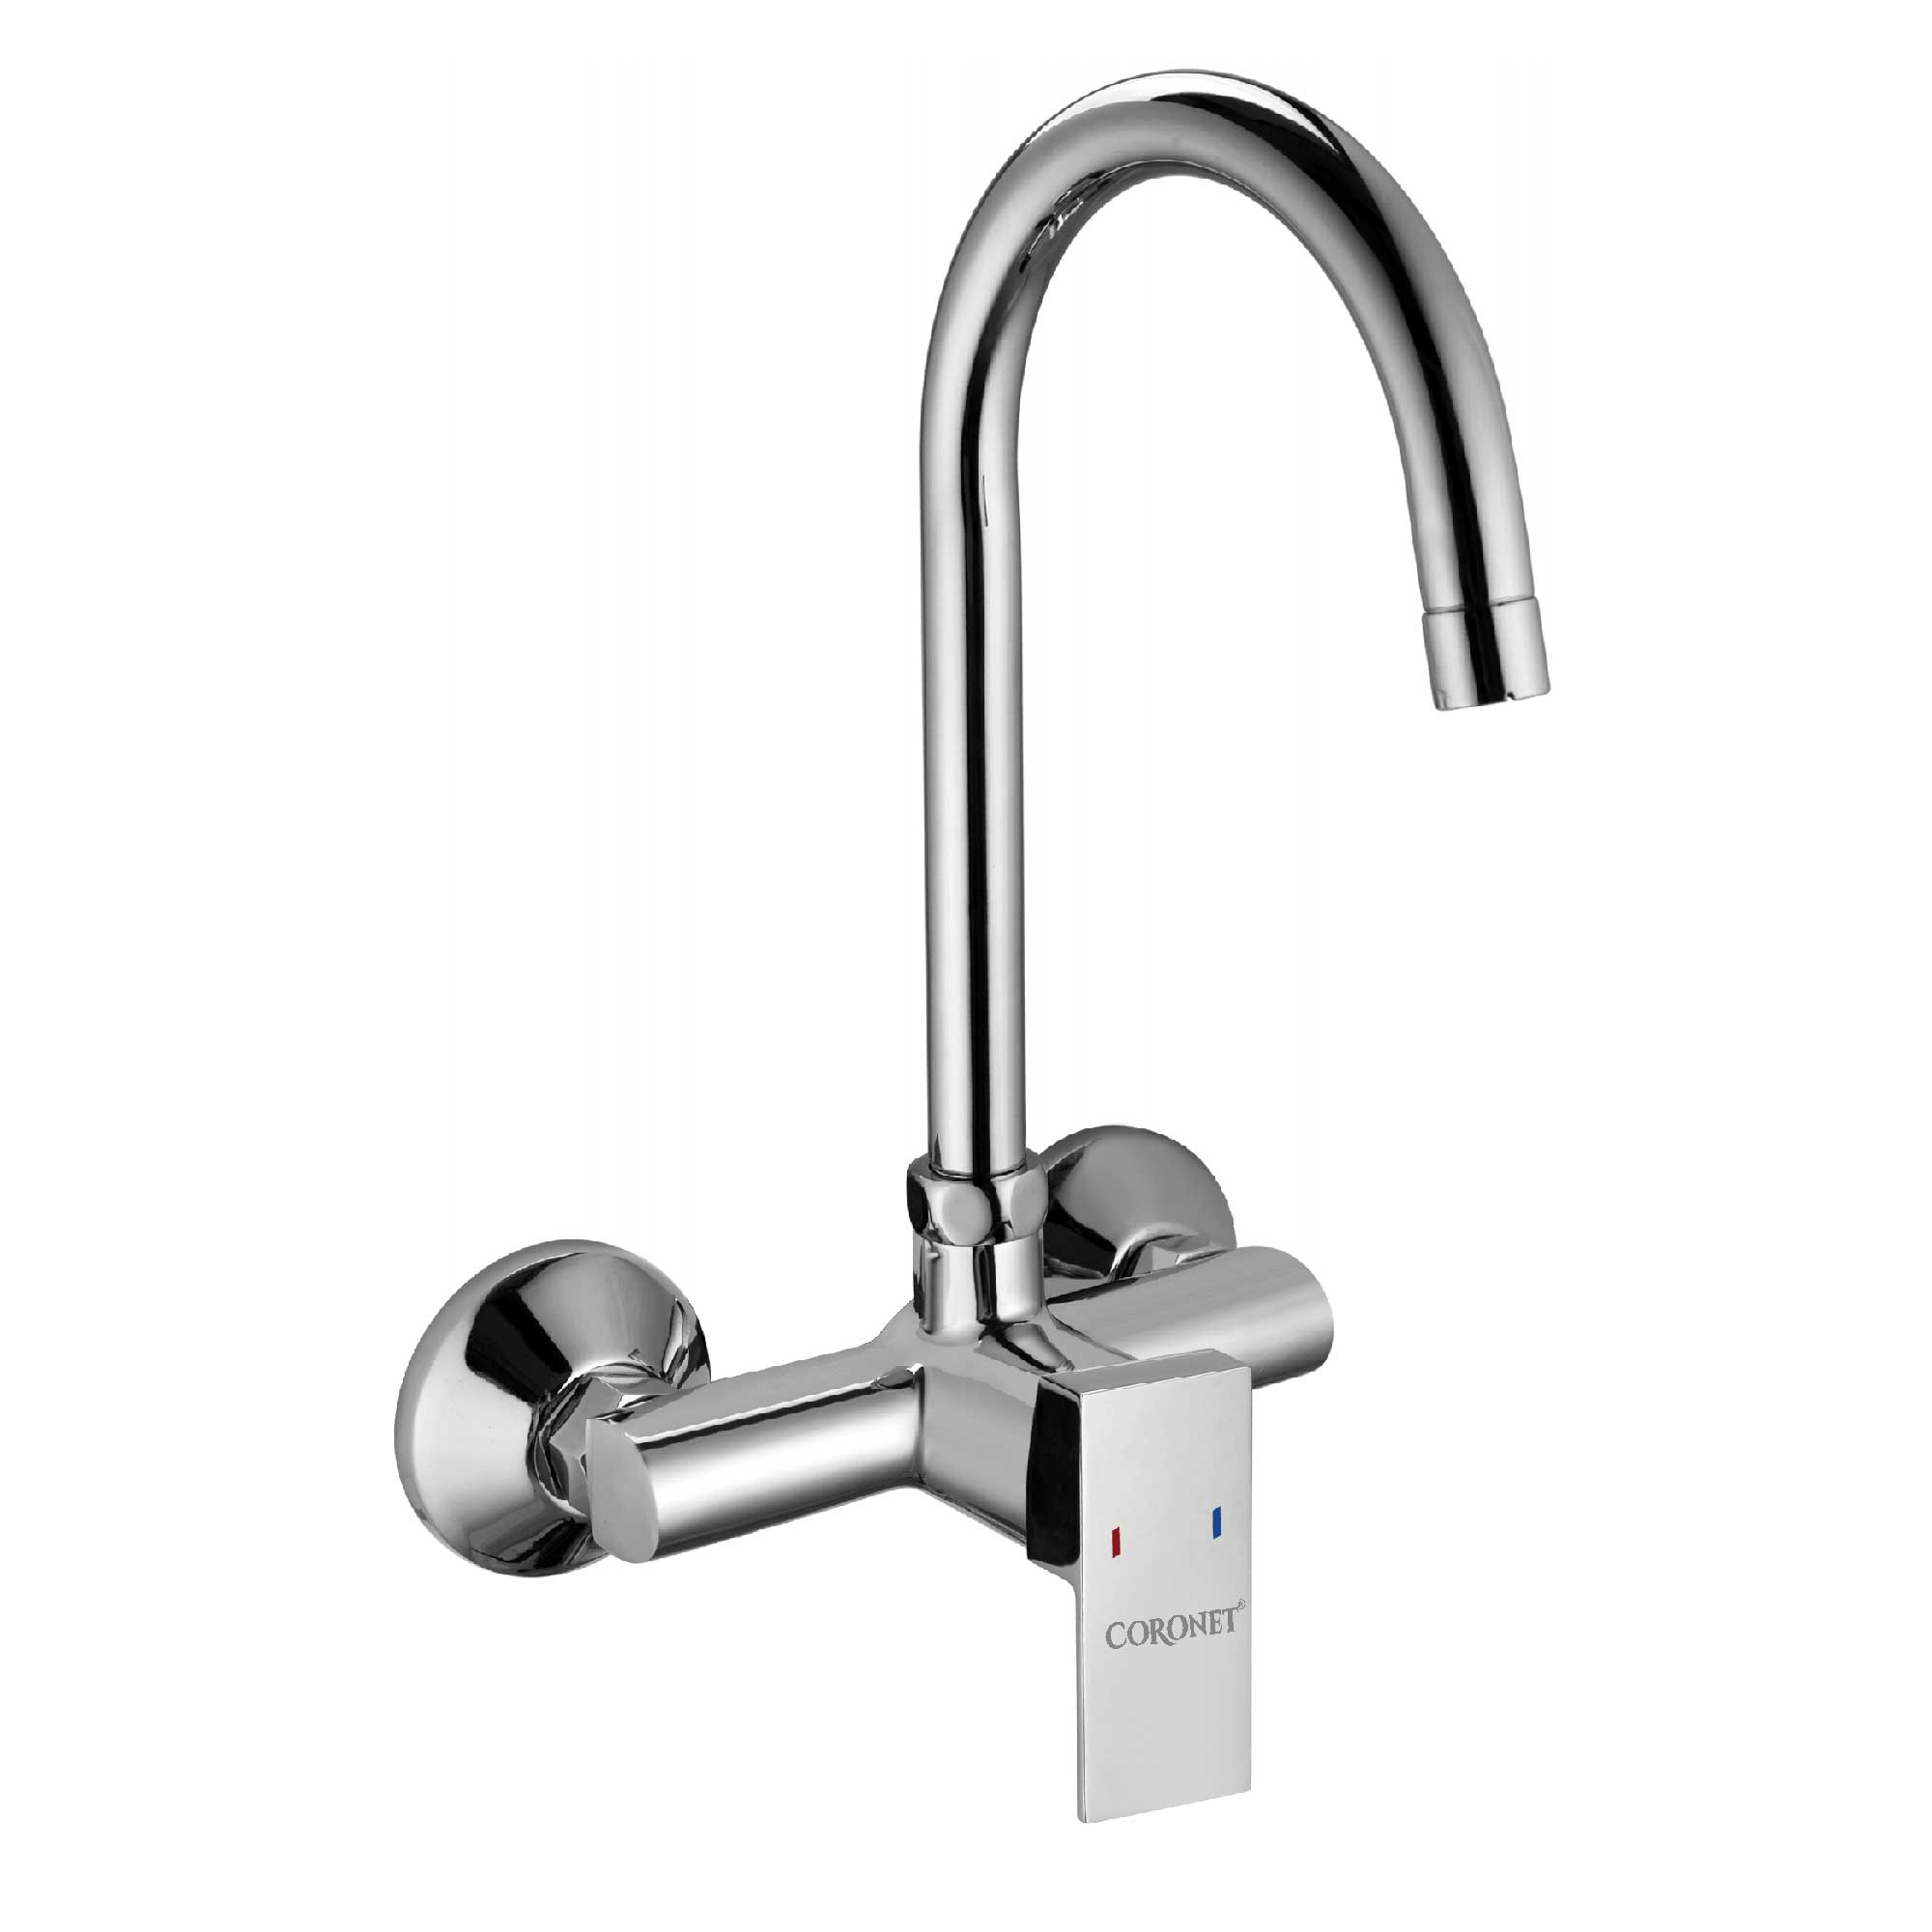 Sink Mixer Wall Mounted With Swivel Spout